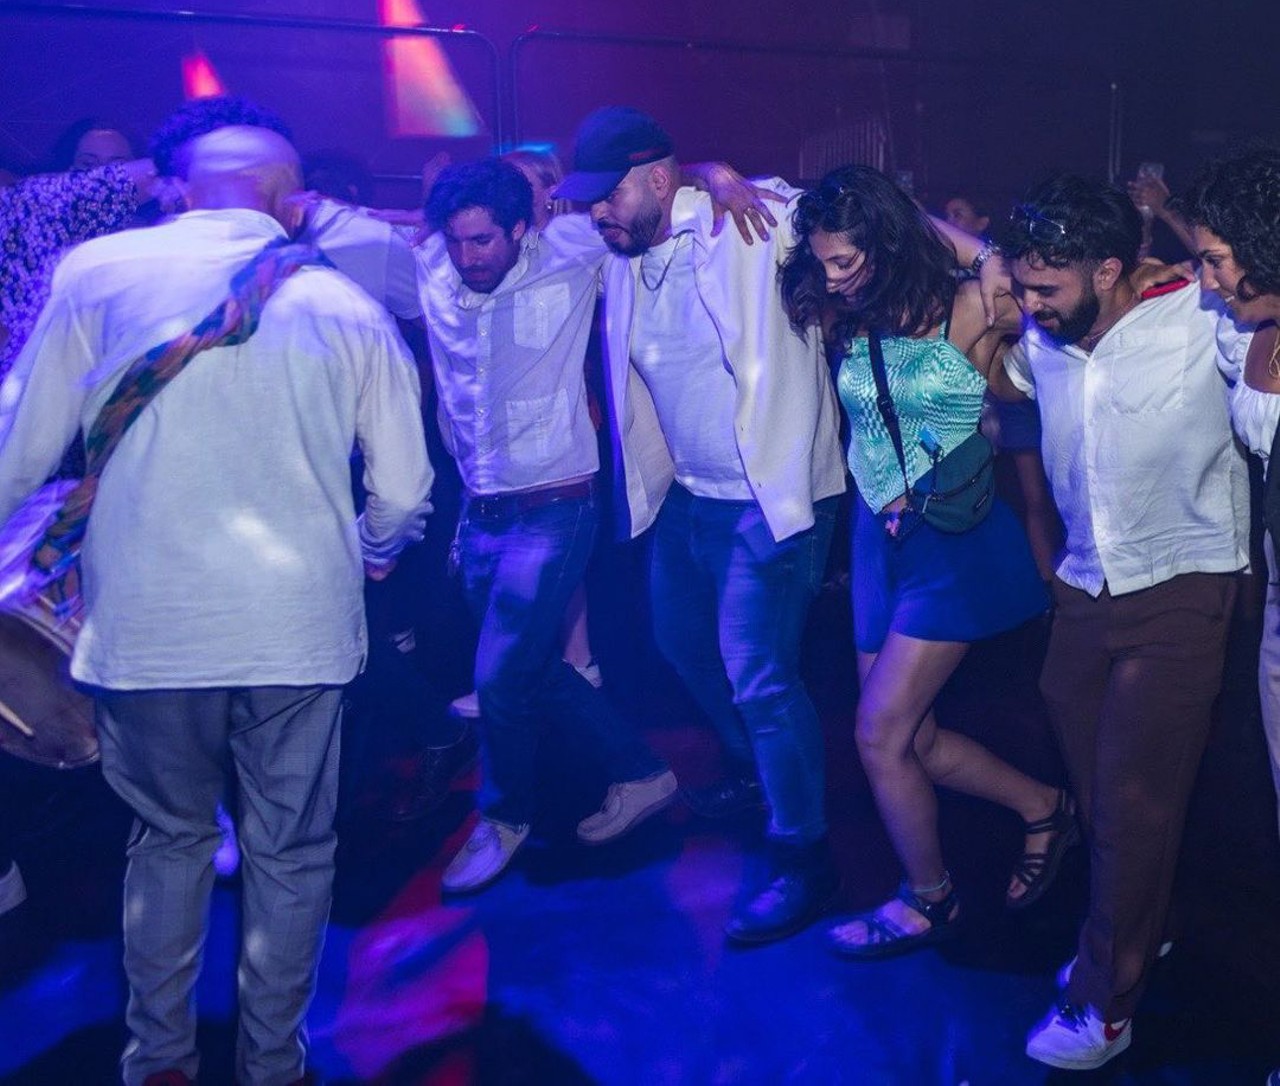 
Laylit
When: Feb. 17 from 9 p.m.-2 a.m.
Where: Spot Lite
What: An Arabic dance party
Who: Local DJs Tammy Lakkis and aa3, plus Montreal DJ Mnsa, and NYC DJ Saphe.
Why: Celebrate culture with traditional Arab music mixed with hip-hop and pop.